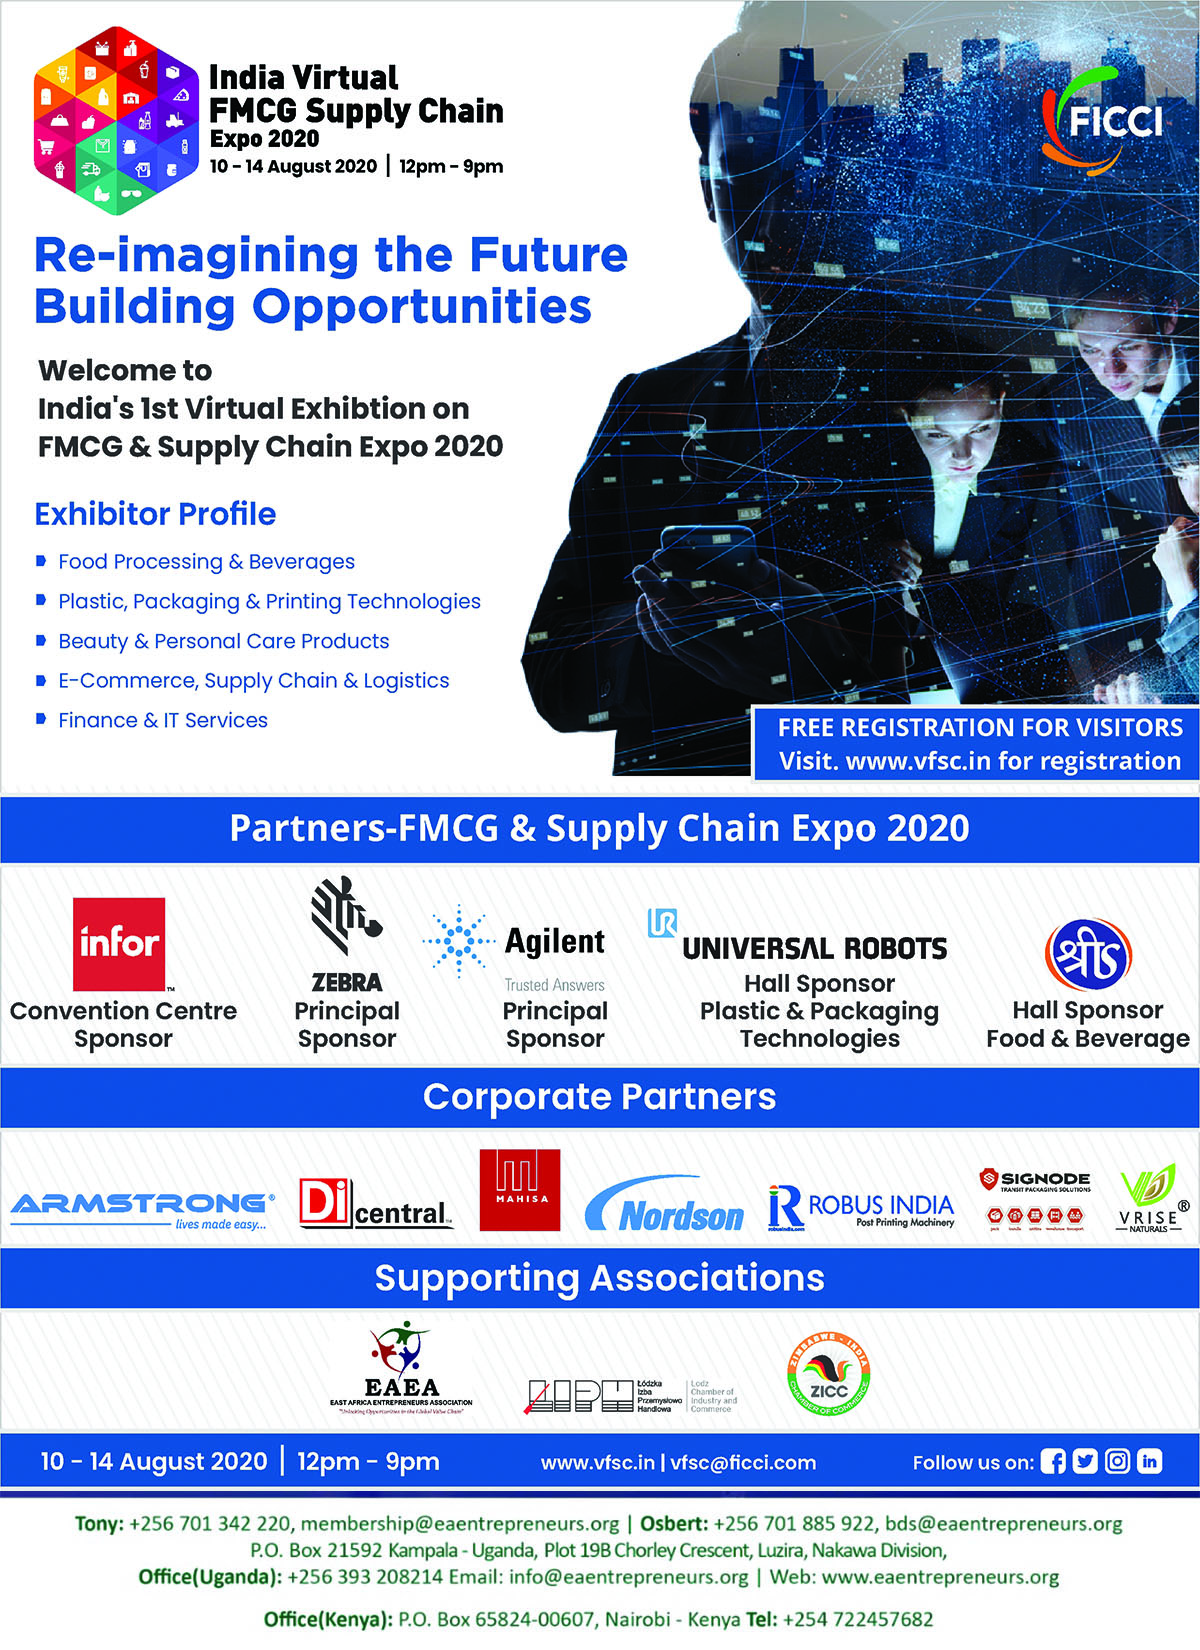 Virtual FMCG & Supply Chain Expo, August 10-14, 2020, India